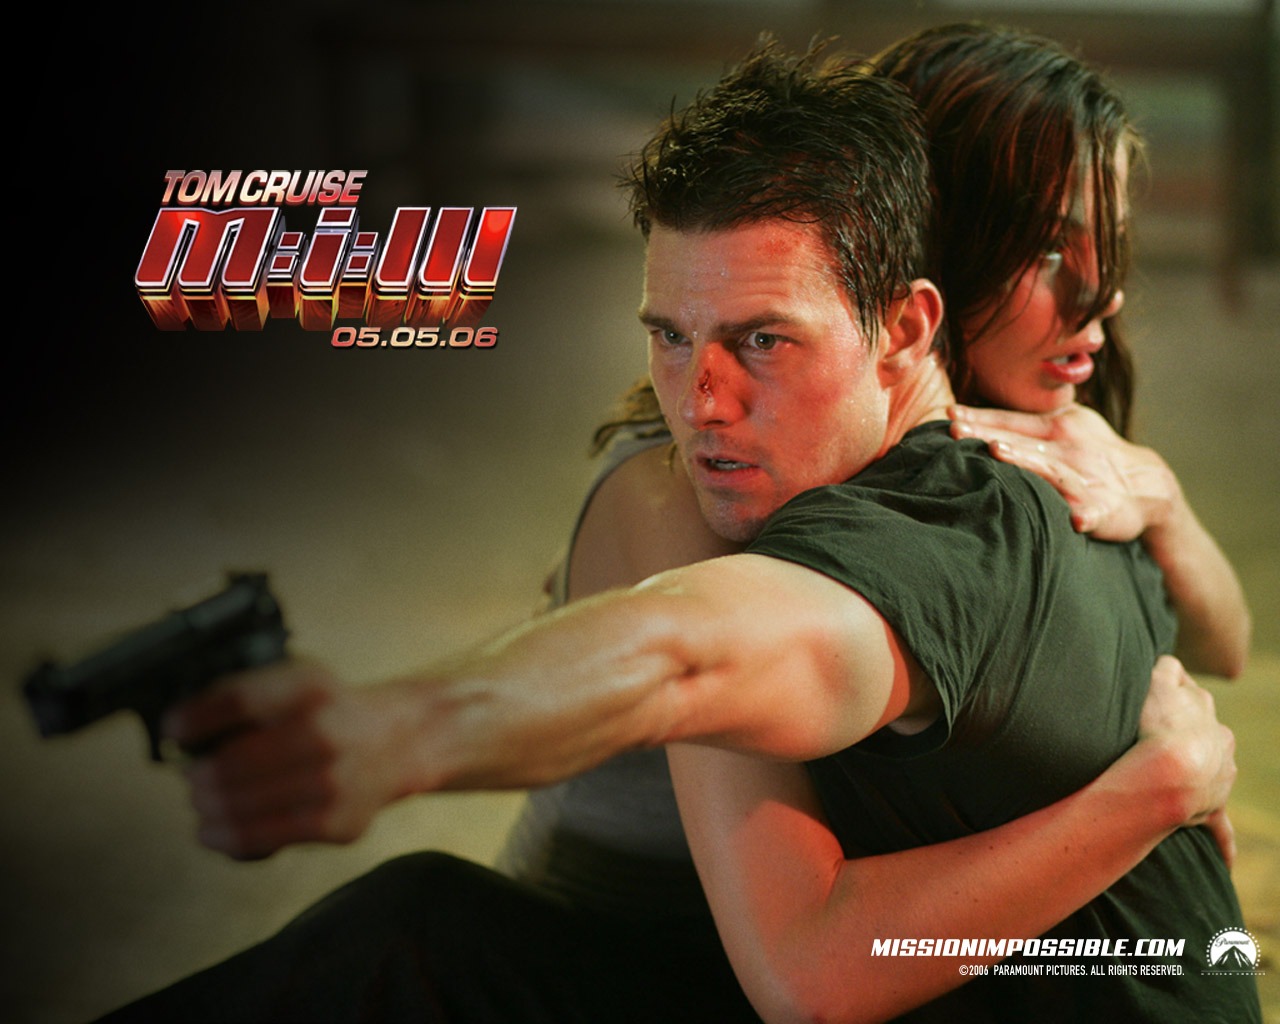 Mission Impossible 3 Wallpaper #1 - 1280x1024